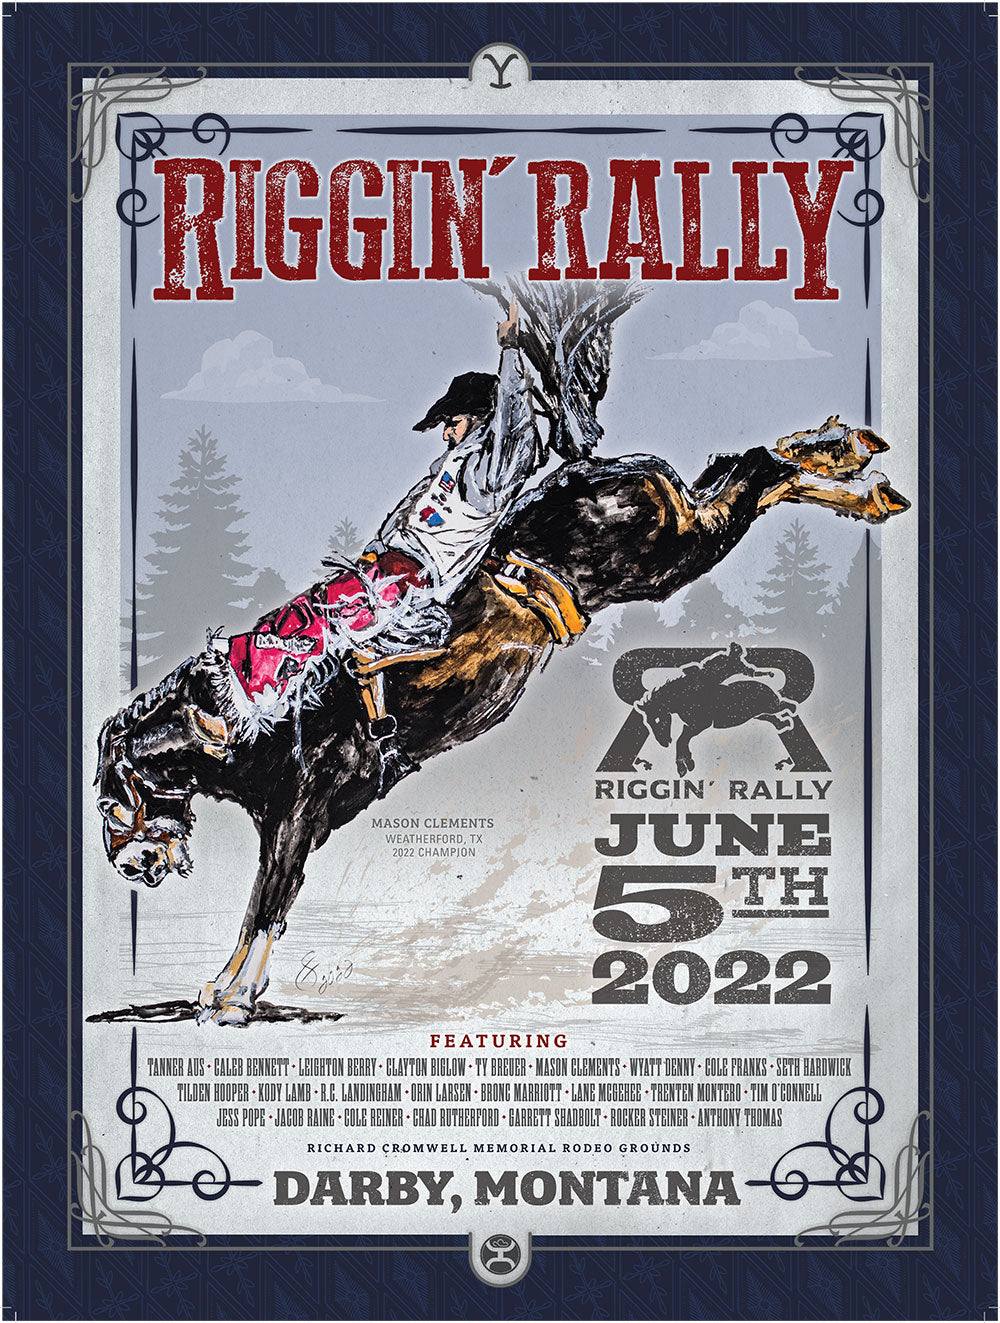 "Riggin' Rally" Limited Edition 2022 Darby Montana Poster Hooey